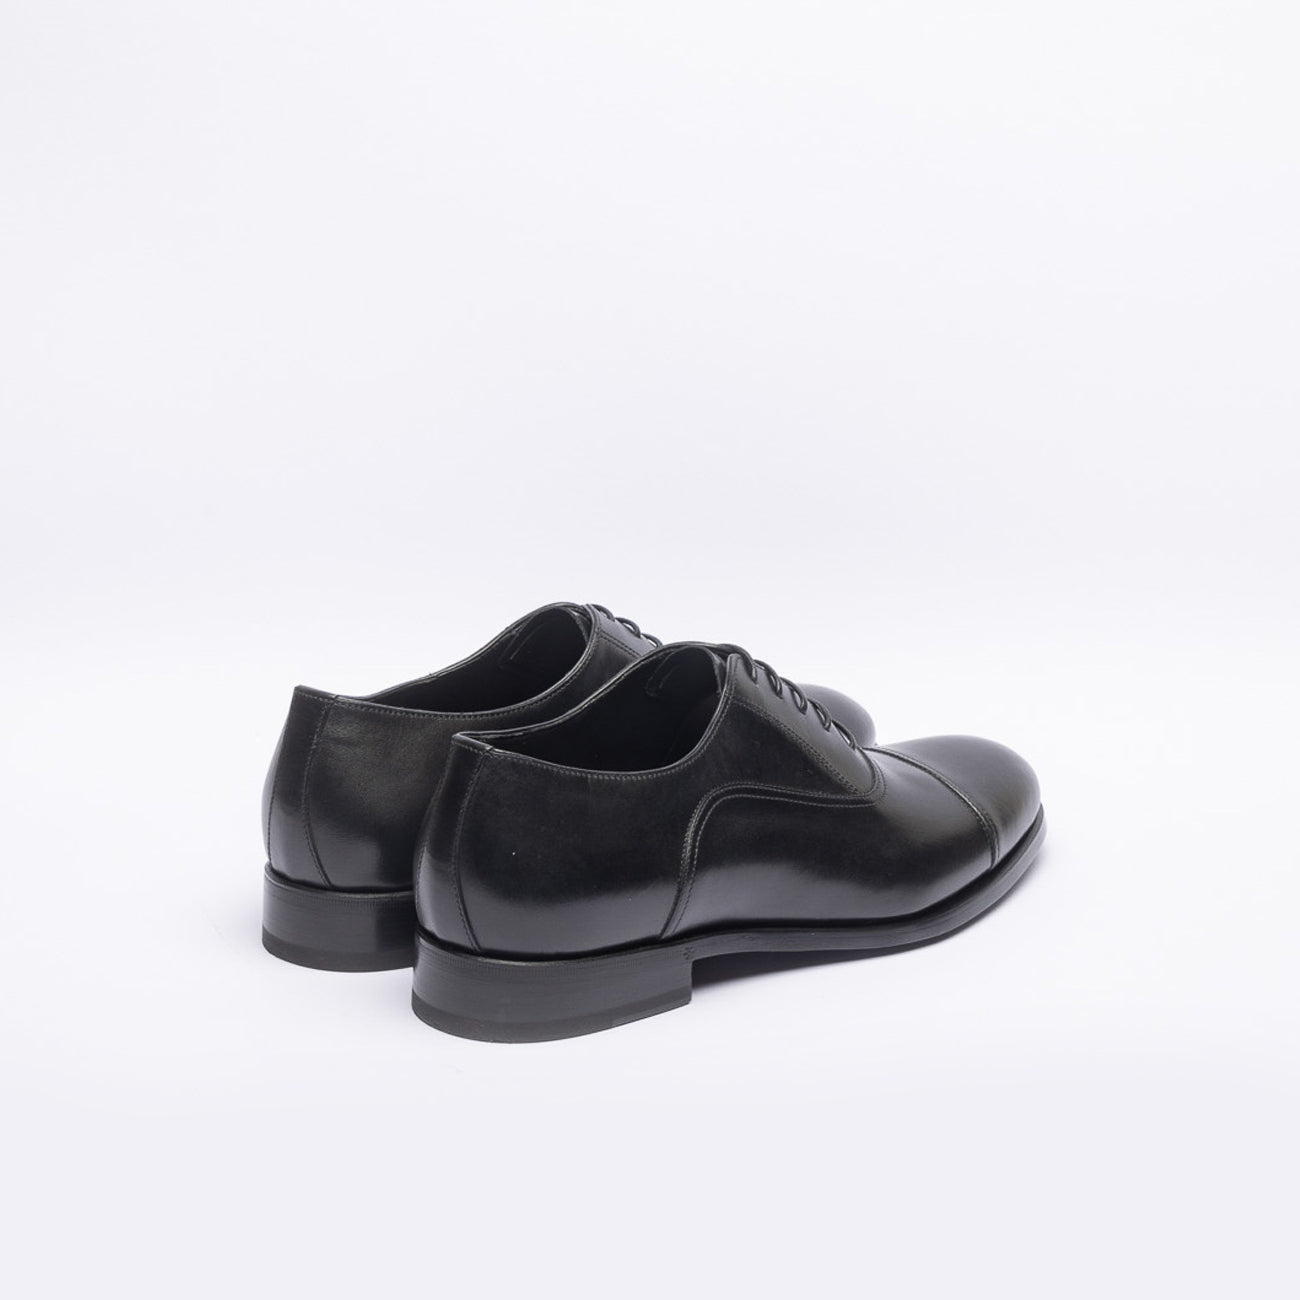 Barrett 232U005 Oxford lace-up shoes in black leather